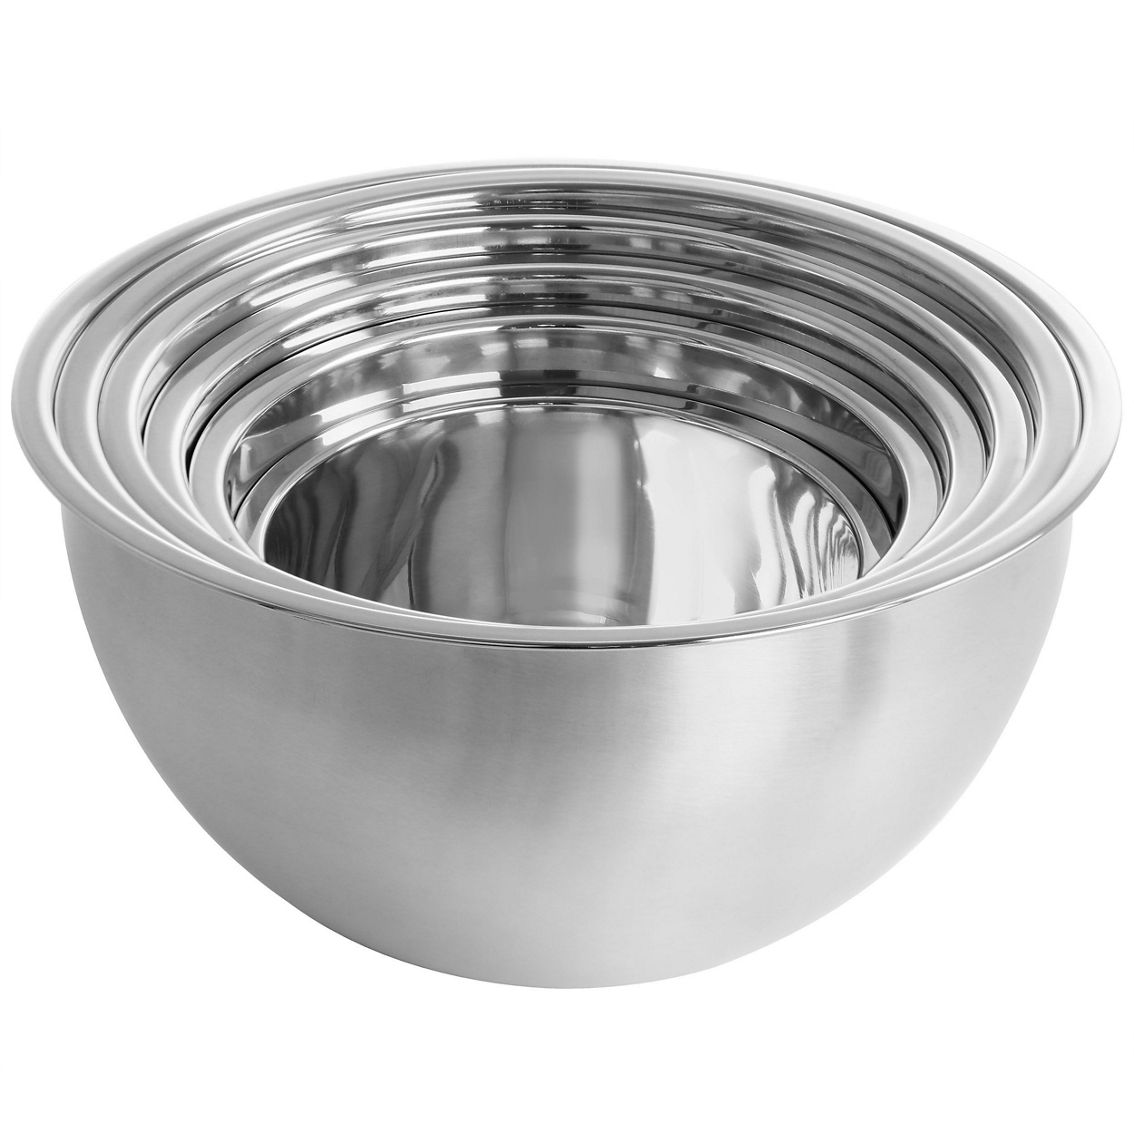 MegaChef 14 Piece Stainless Steel Measuring Cup and Spoon Set with Mixing Bowls - Image 4 of 5